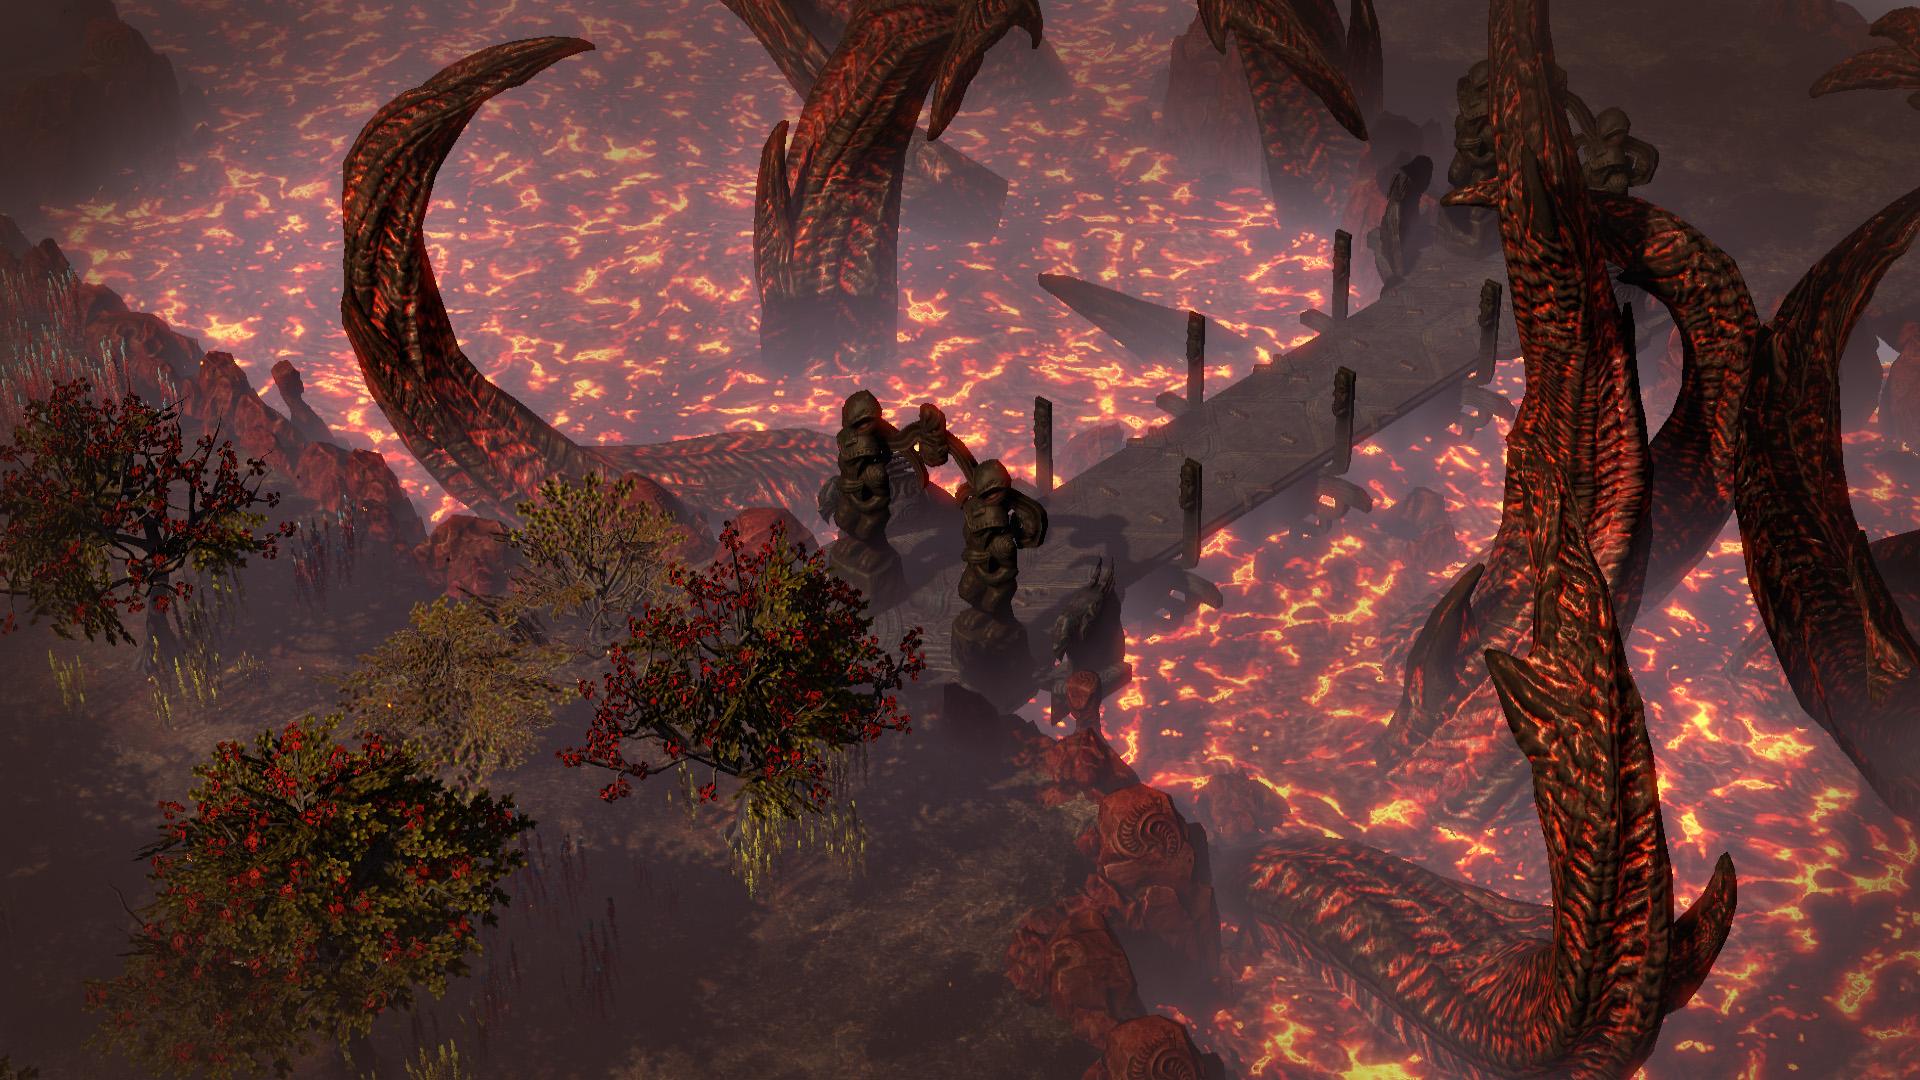 Screenshot №35 from game Path of Exile